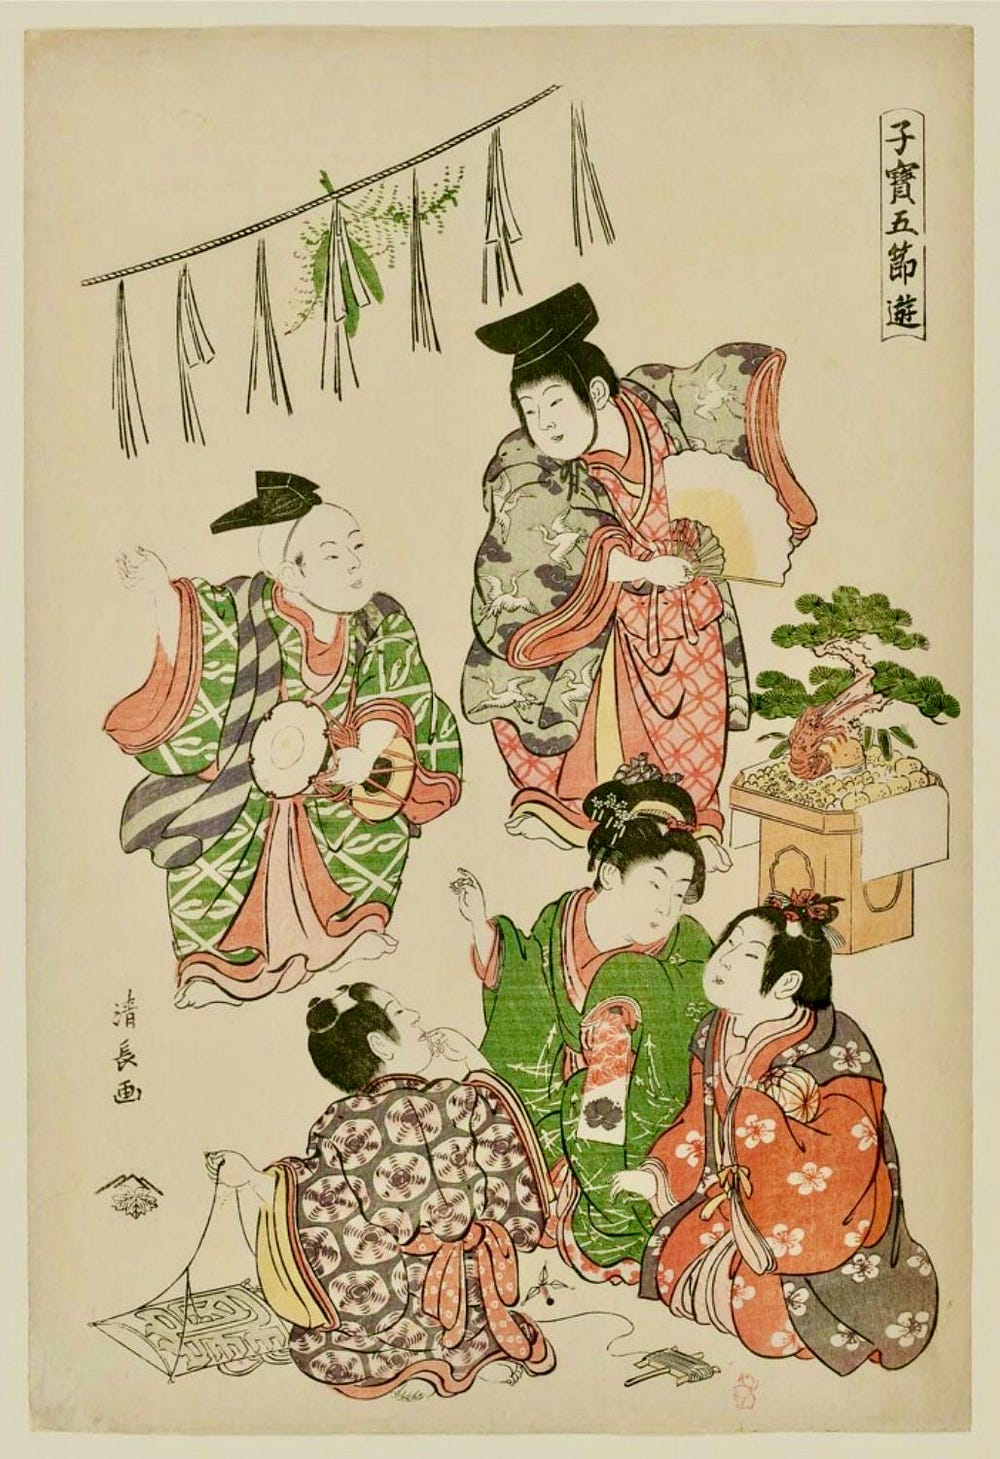 New Year's woodblock print of children dressed in elaborate kimonos beneath a shimenawa rope hung with tassels. Two boys are dancing, one boy is sitting on the ground with his kite, and two girls are sitting and chatting near a bonsai plant on a low table.